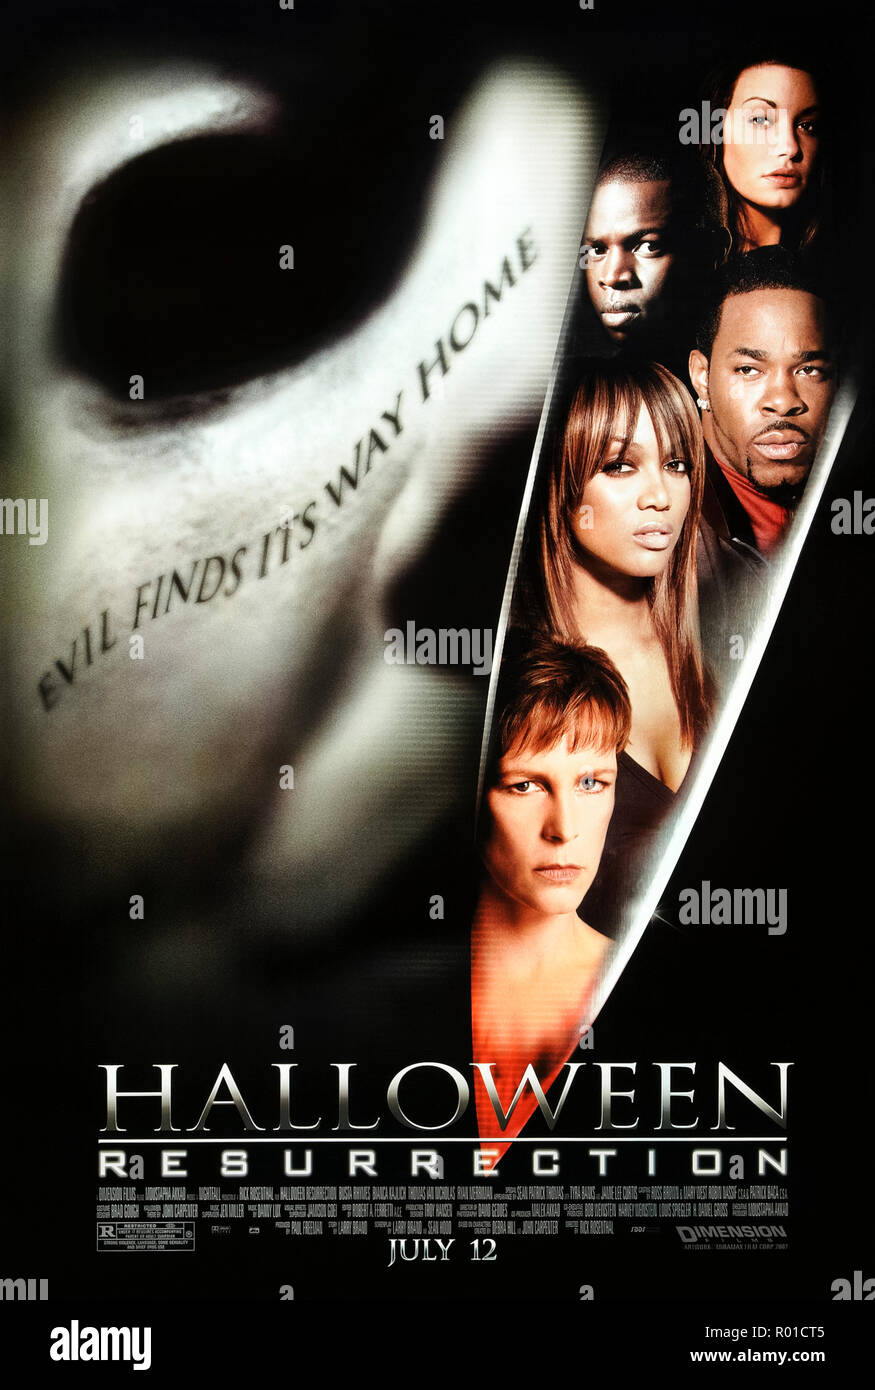 Halloween: Resurrection (2002) directed by Rick Rosenthal and starring Jamie Lee Curtis, Busta Rhymes, Brad Loree and Bianca Kajlich. Serial Killer Michael Myers returns to murder the contestants of a reality show. Stock Photo